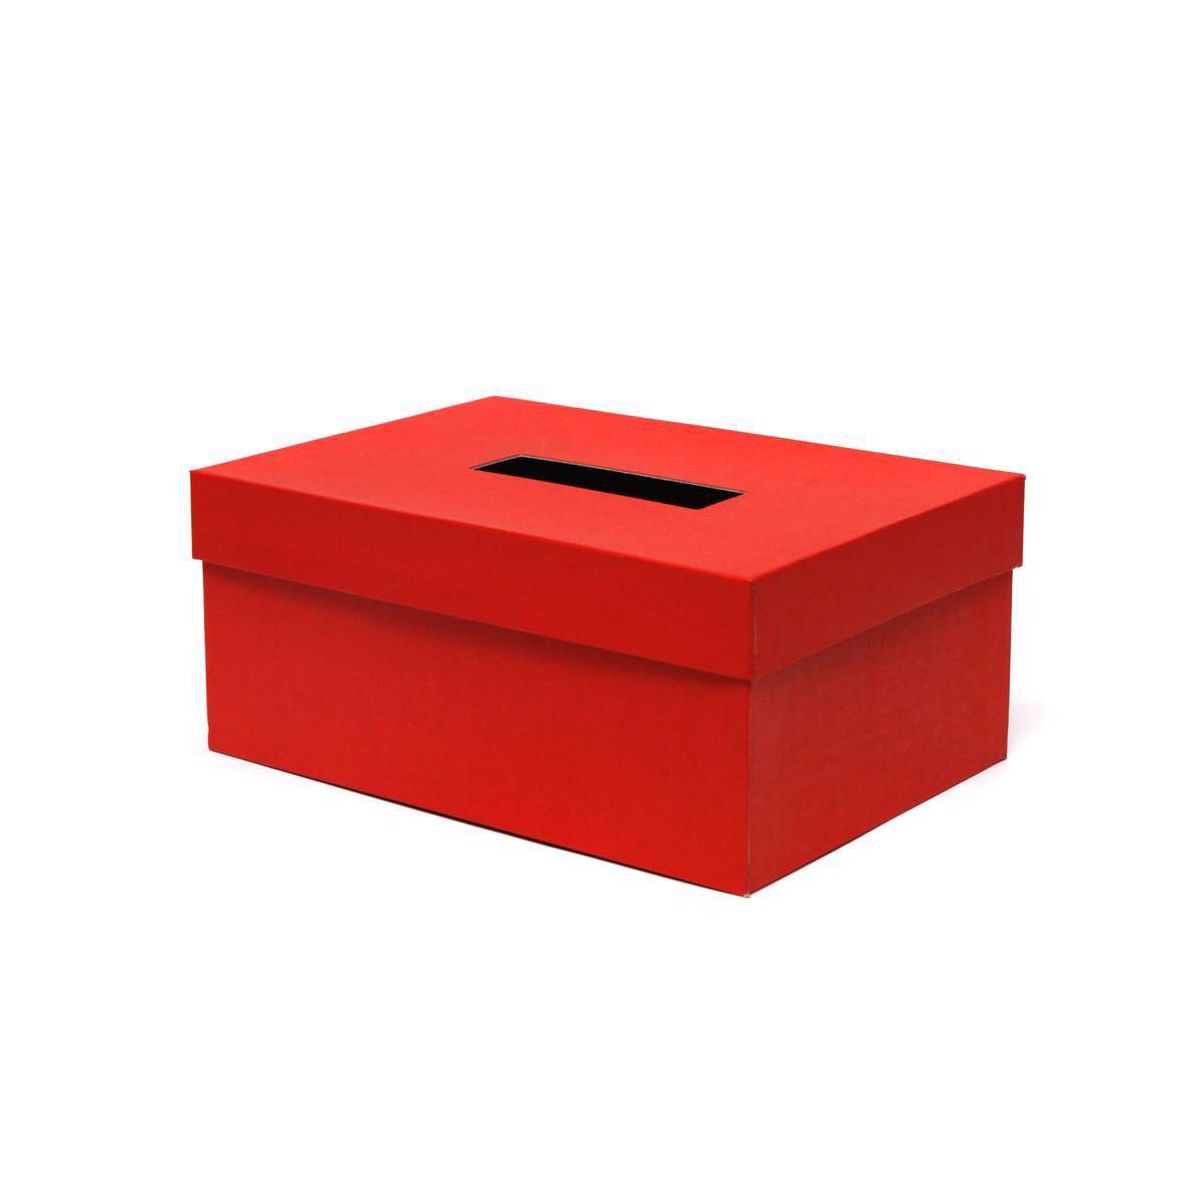 8"x5" Rectangle Shaped Valentine's Day Gift Box Red - Spritz™ | Target